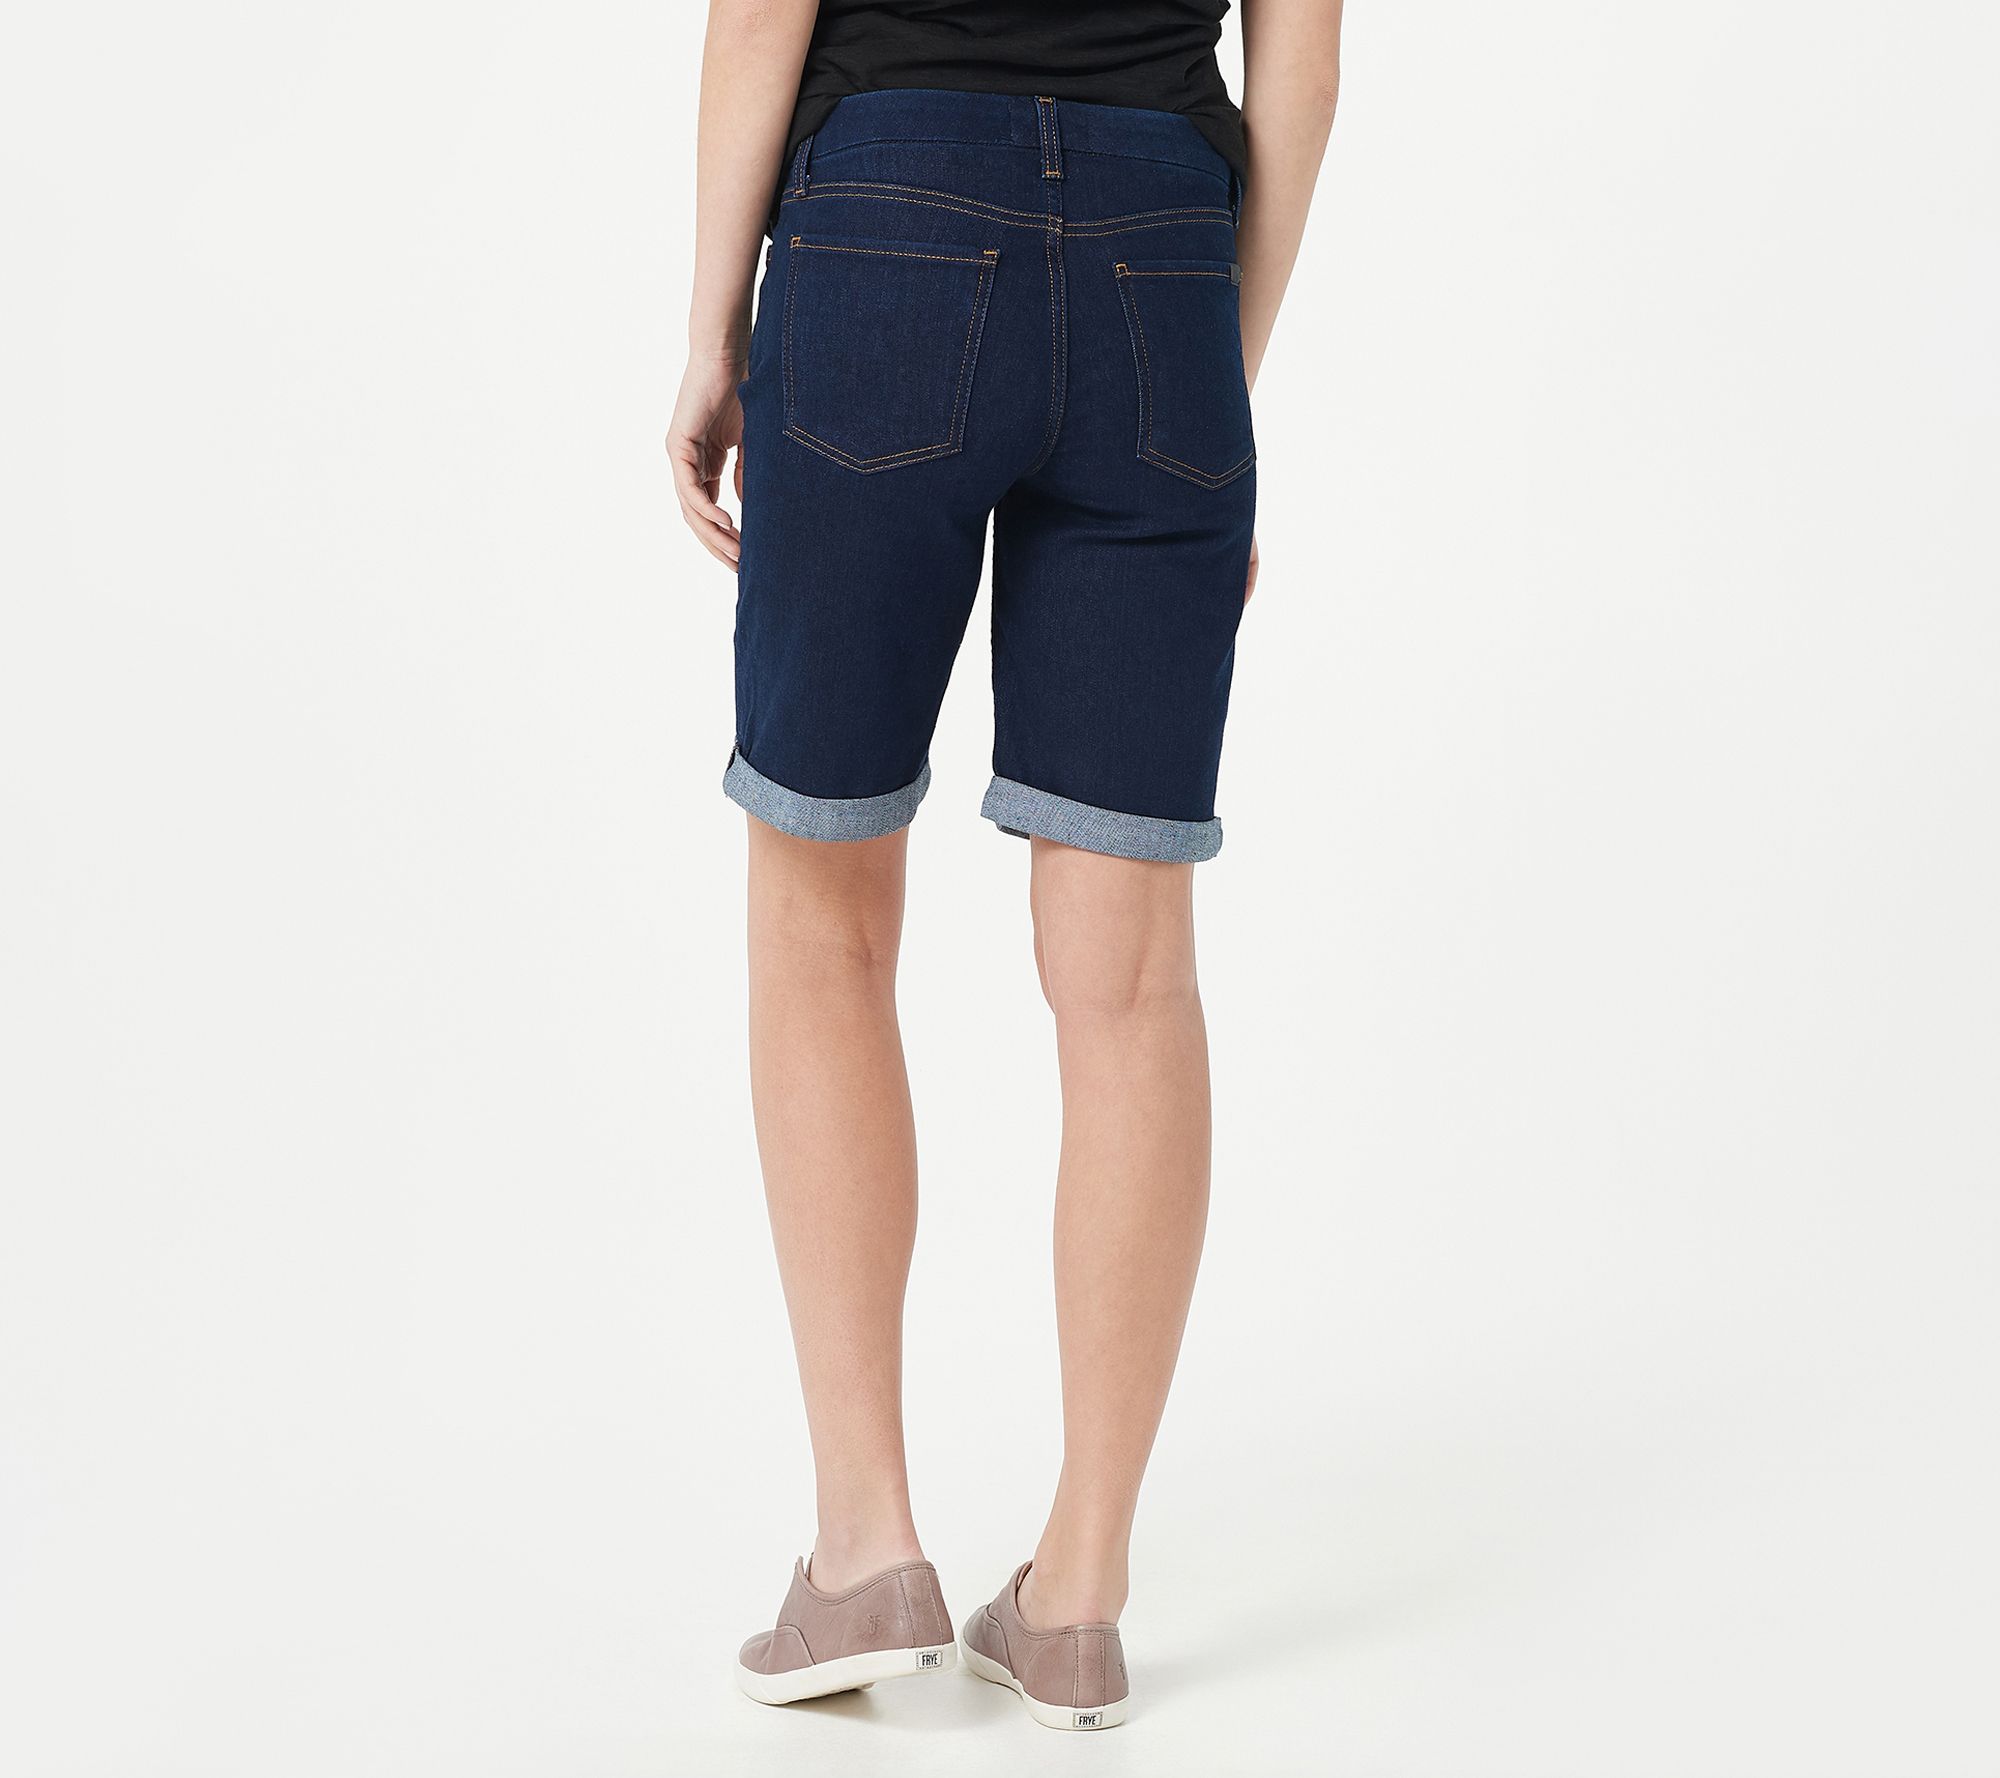 JEN7 by 7 For All Mankind Bermuda Shorts - QVC.com